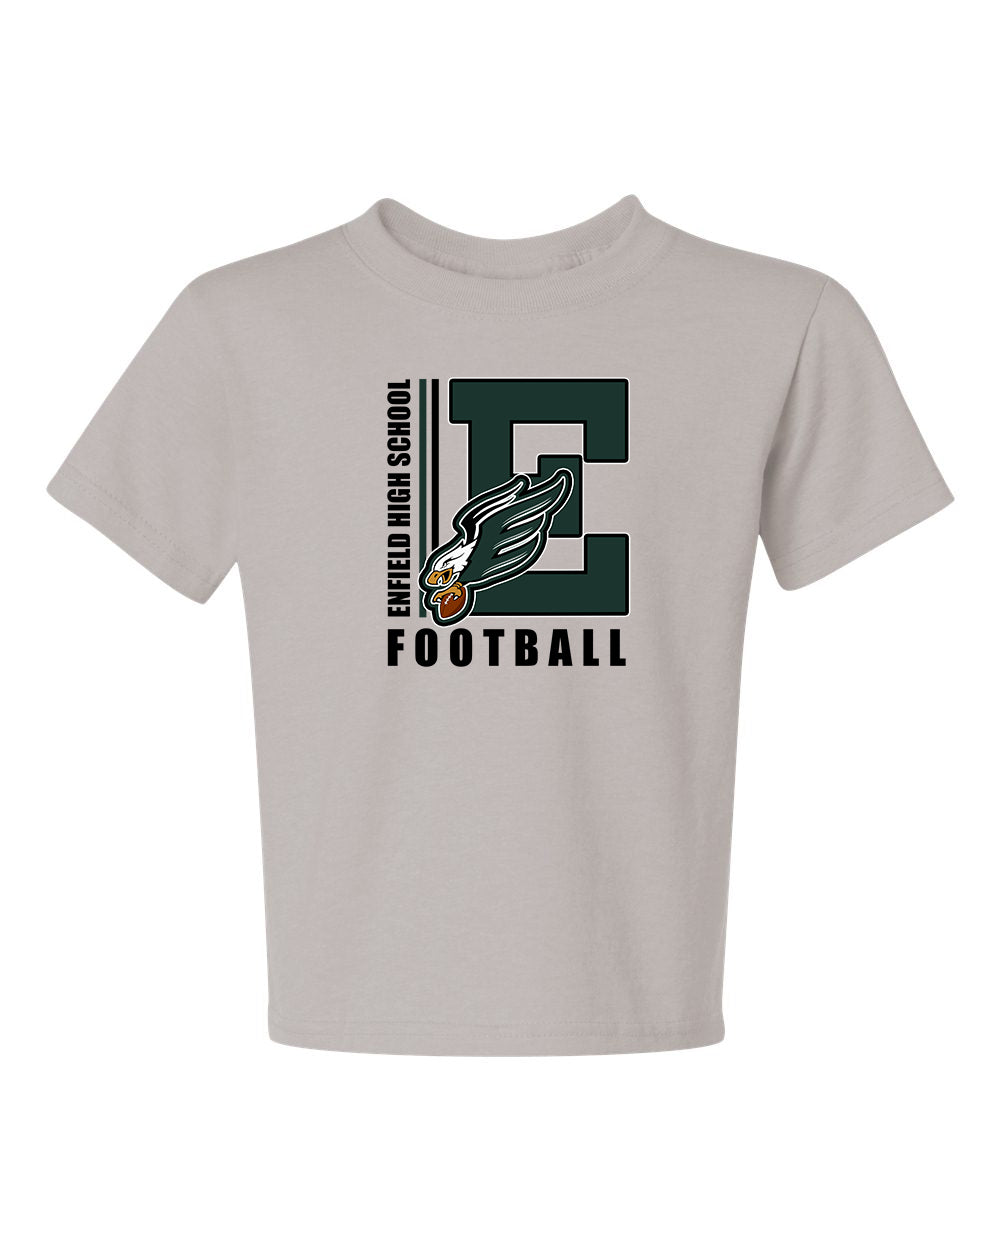 Enfield Eagles Football Youth 50/50 T-shirt "Big E" - 29BR (color options available)